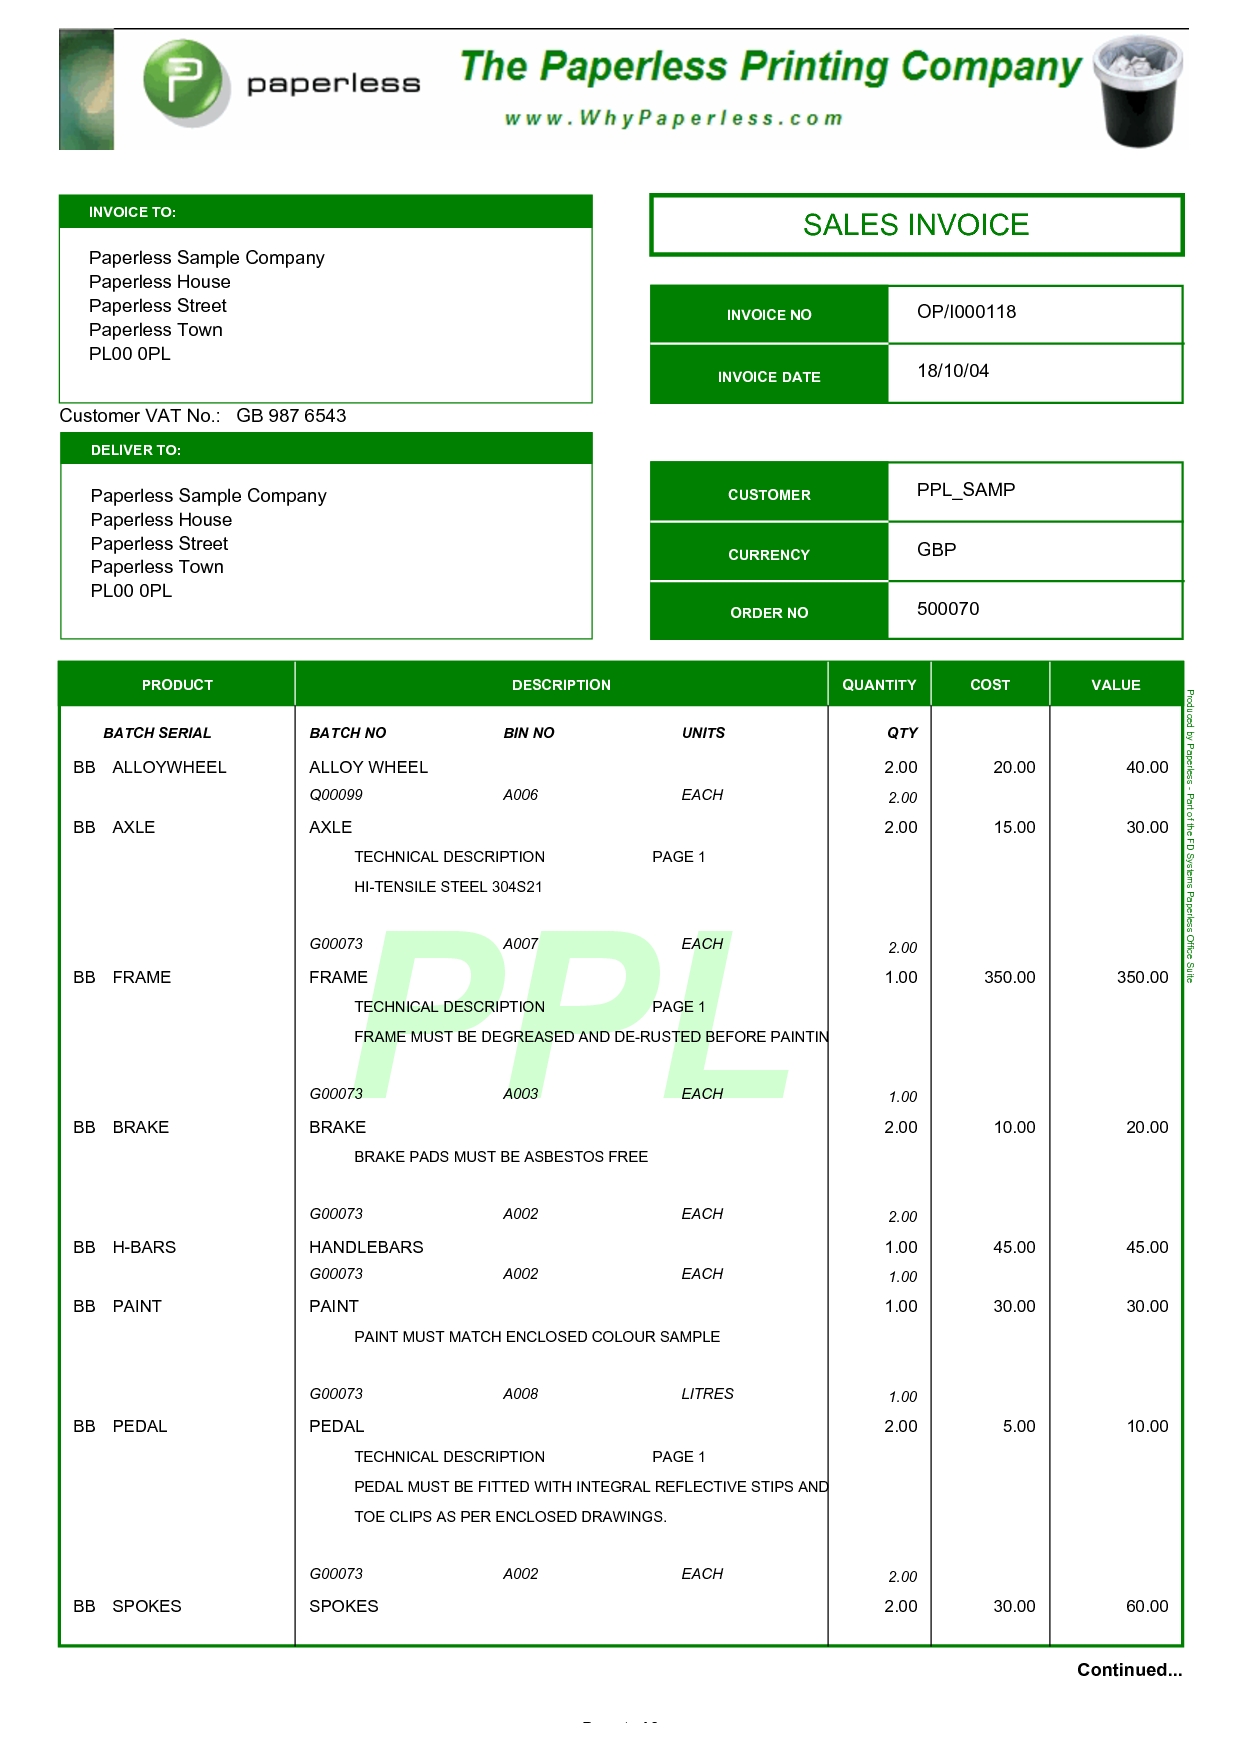 sales invoice template invoice templat free sale invoice forms sales invoice example